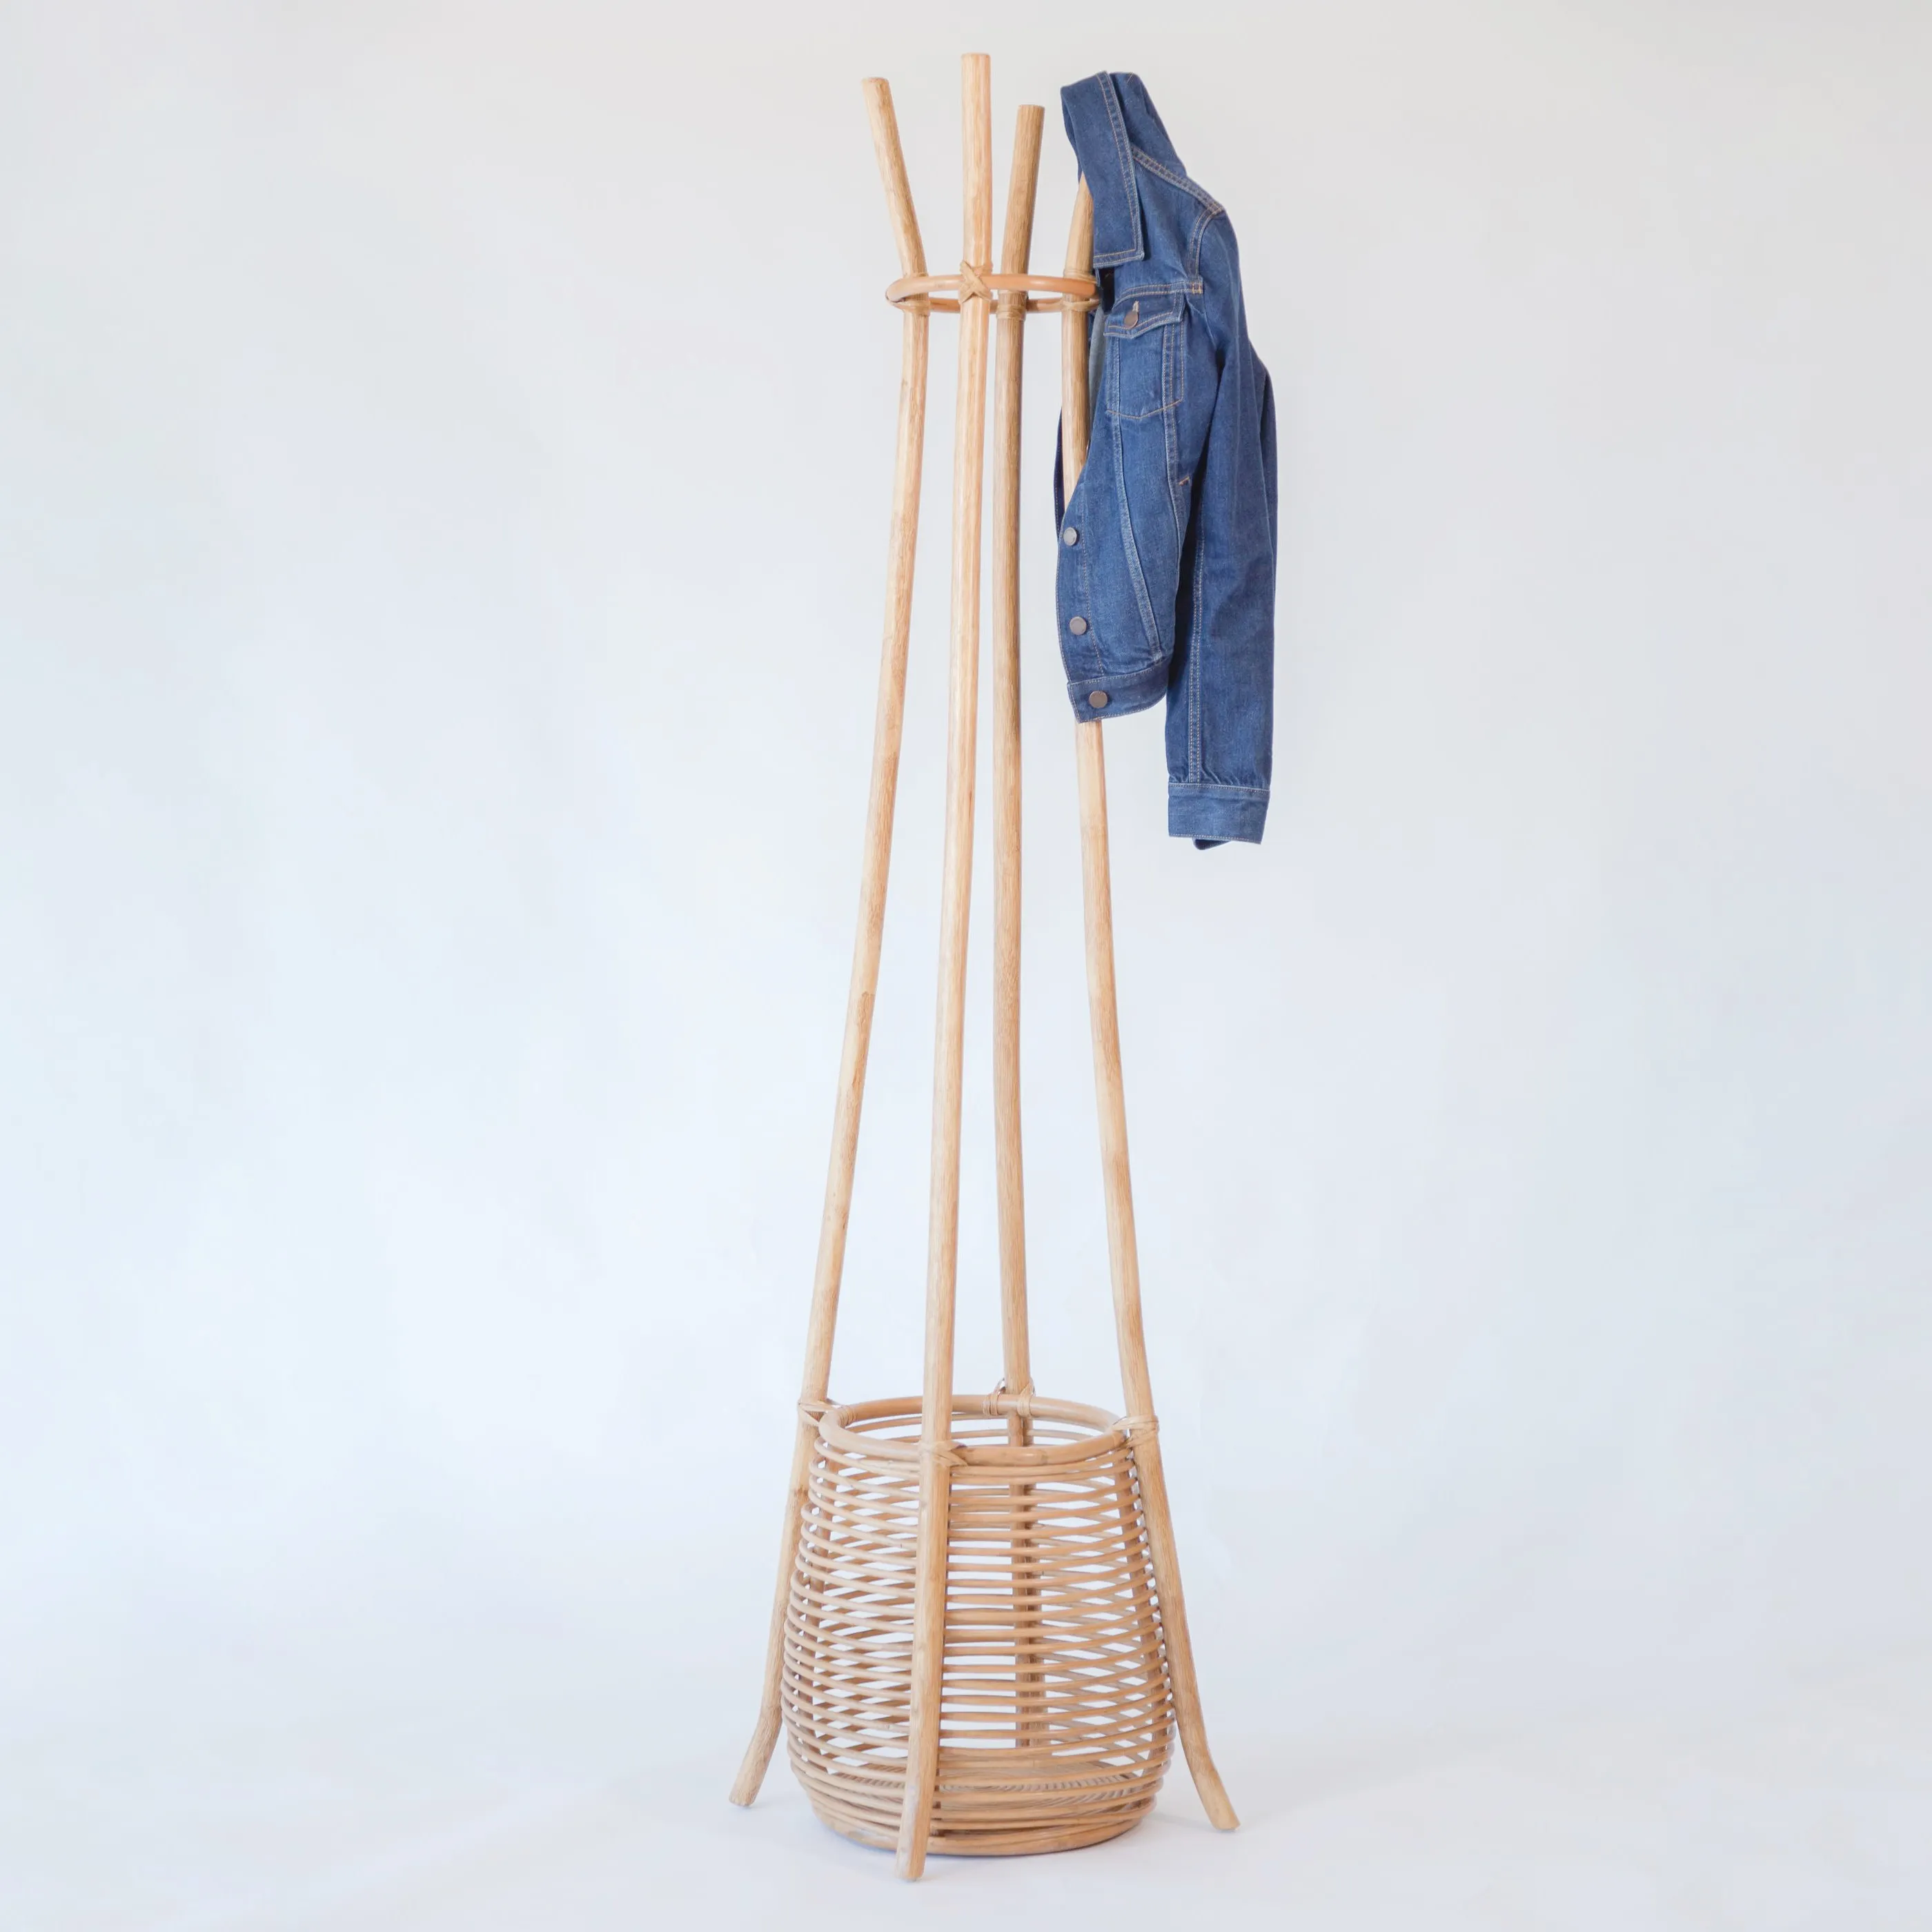 New design rattan racks home accessories coat clothing rack with storage for clothes and coats